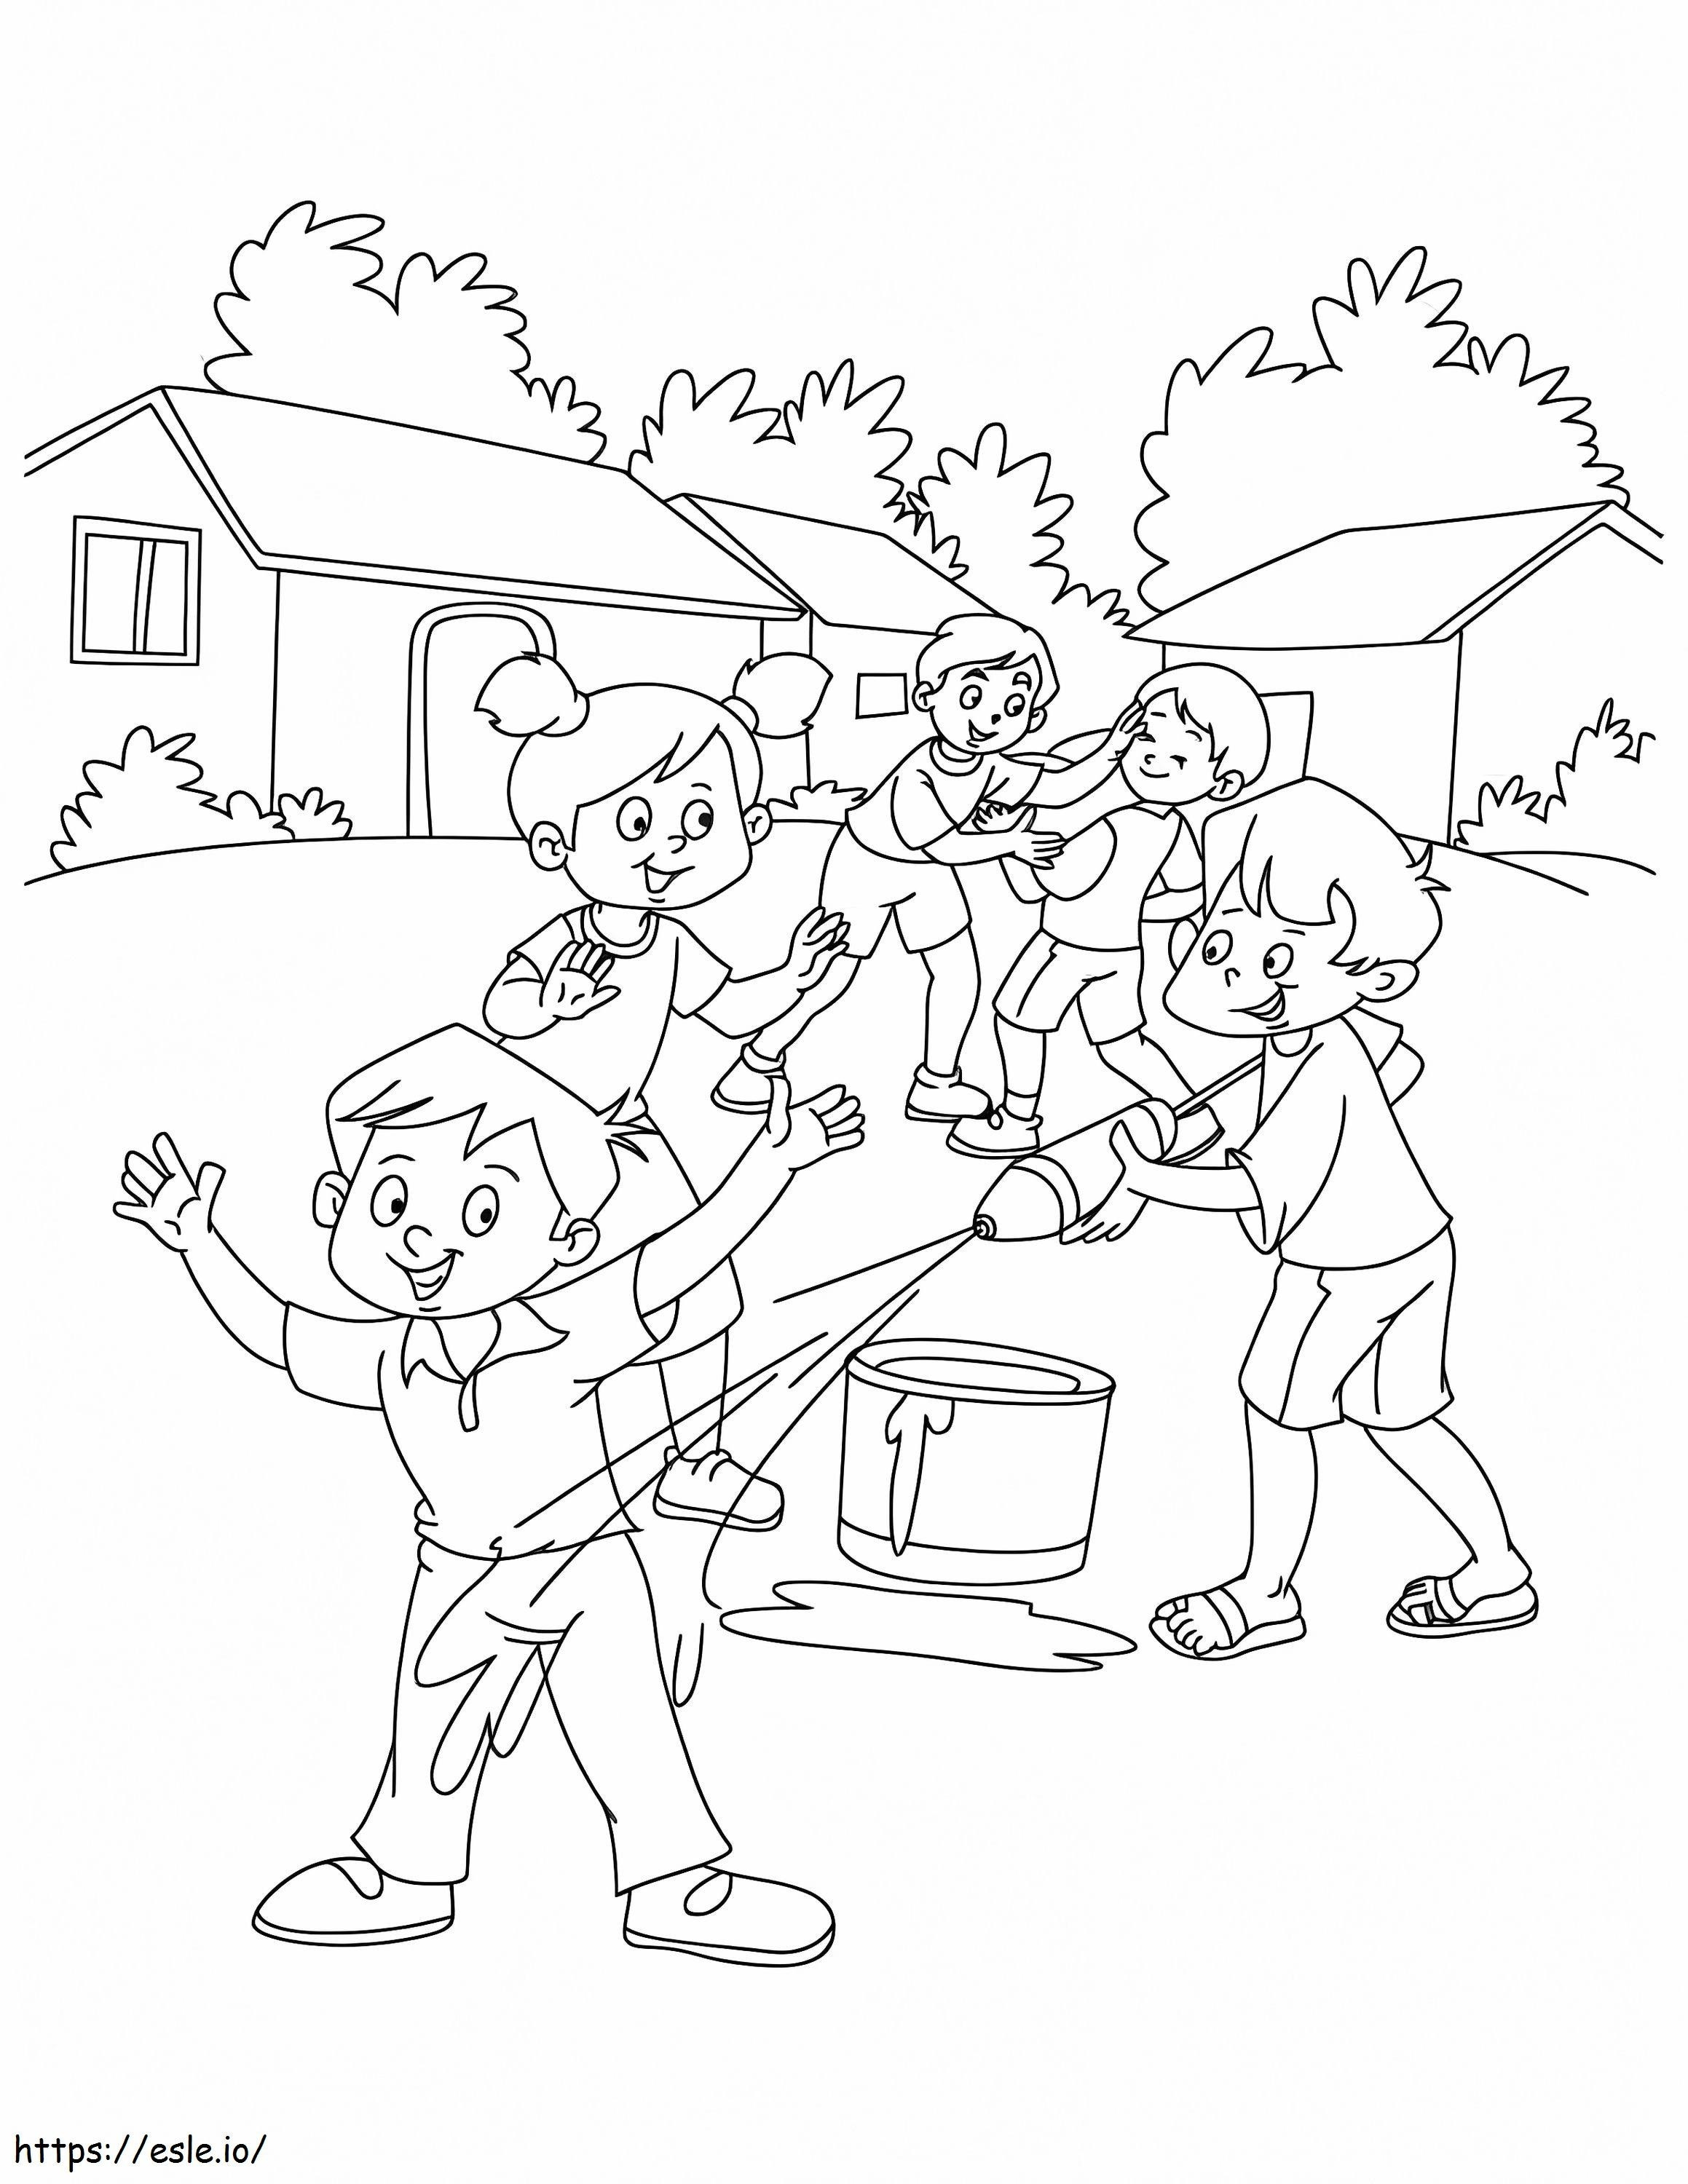 Holi 3 coloring page